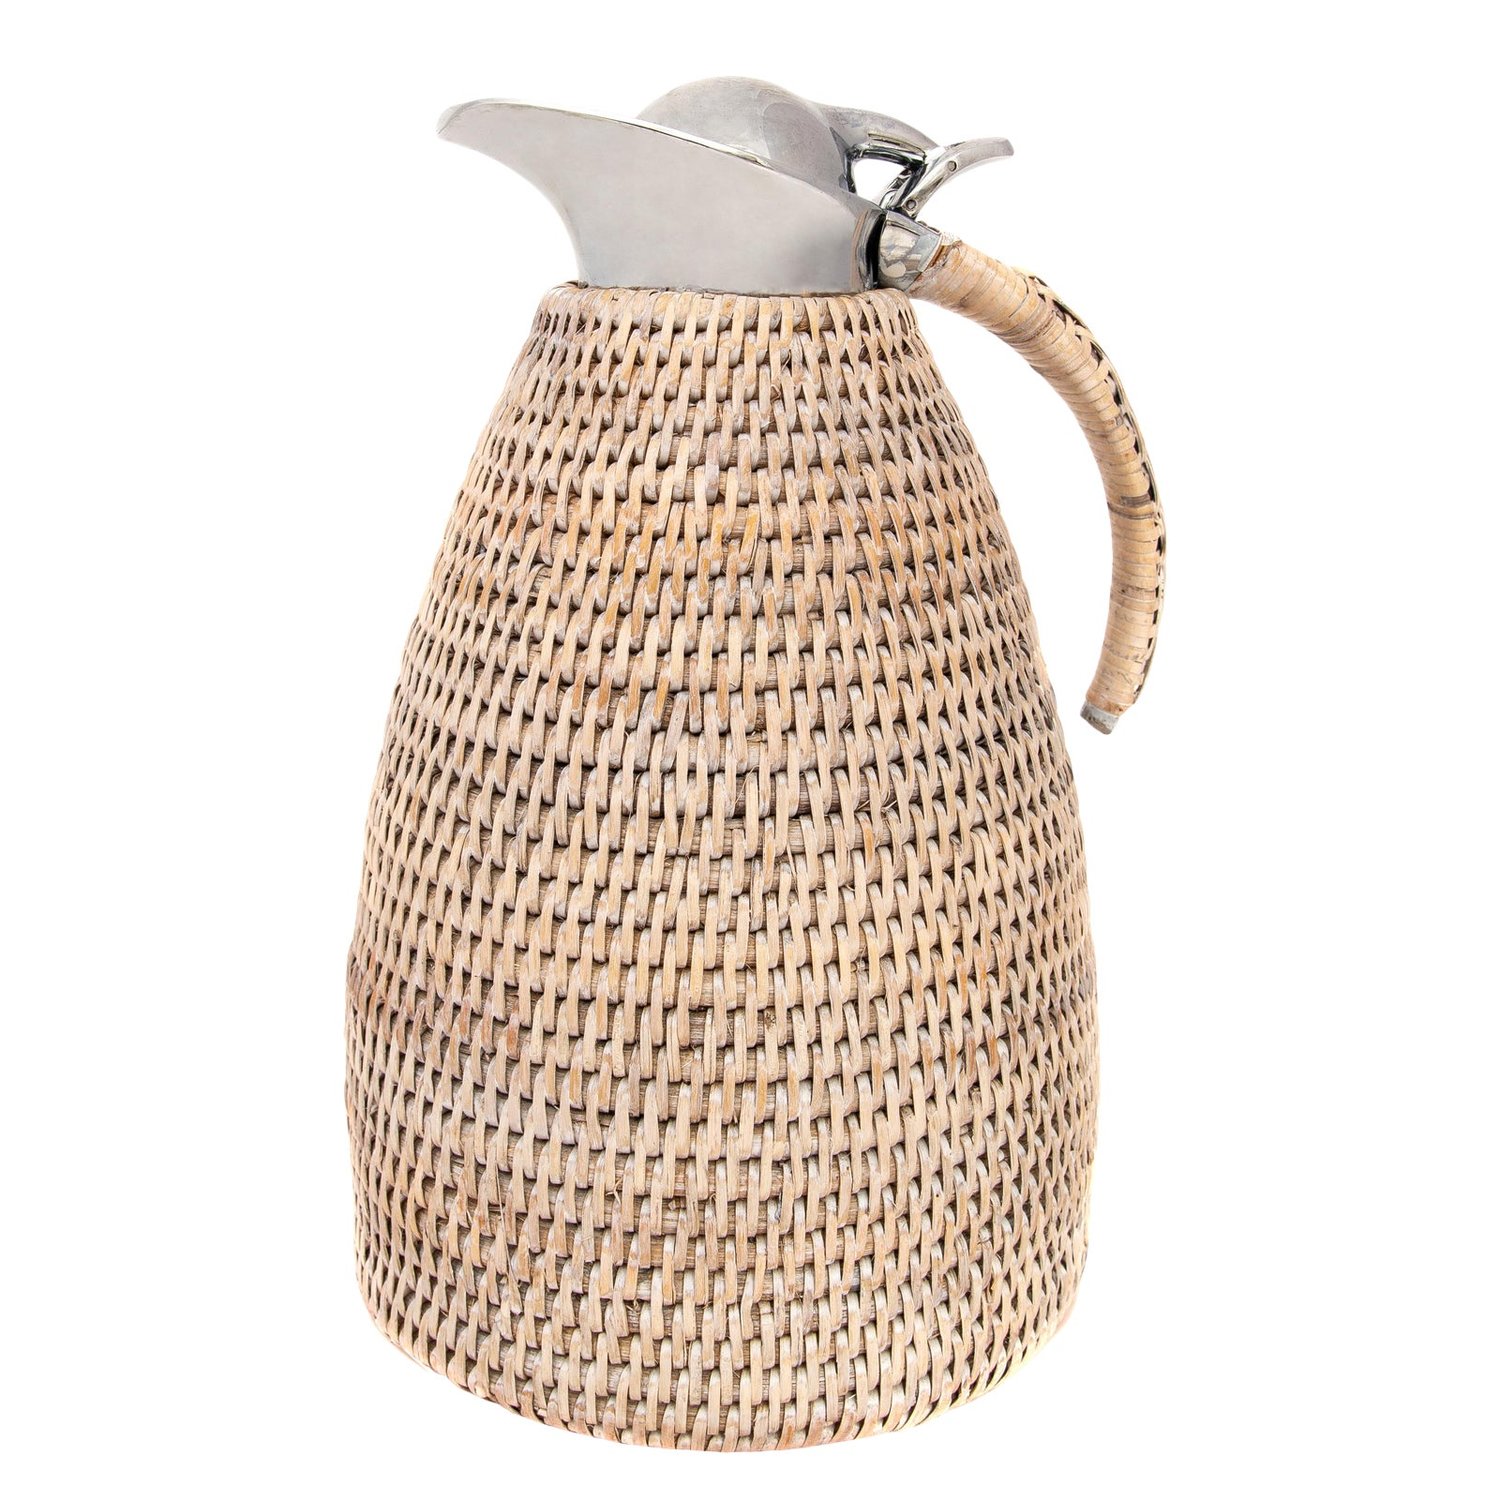 Rooms & Gardens — Rattan Covered Carafe